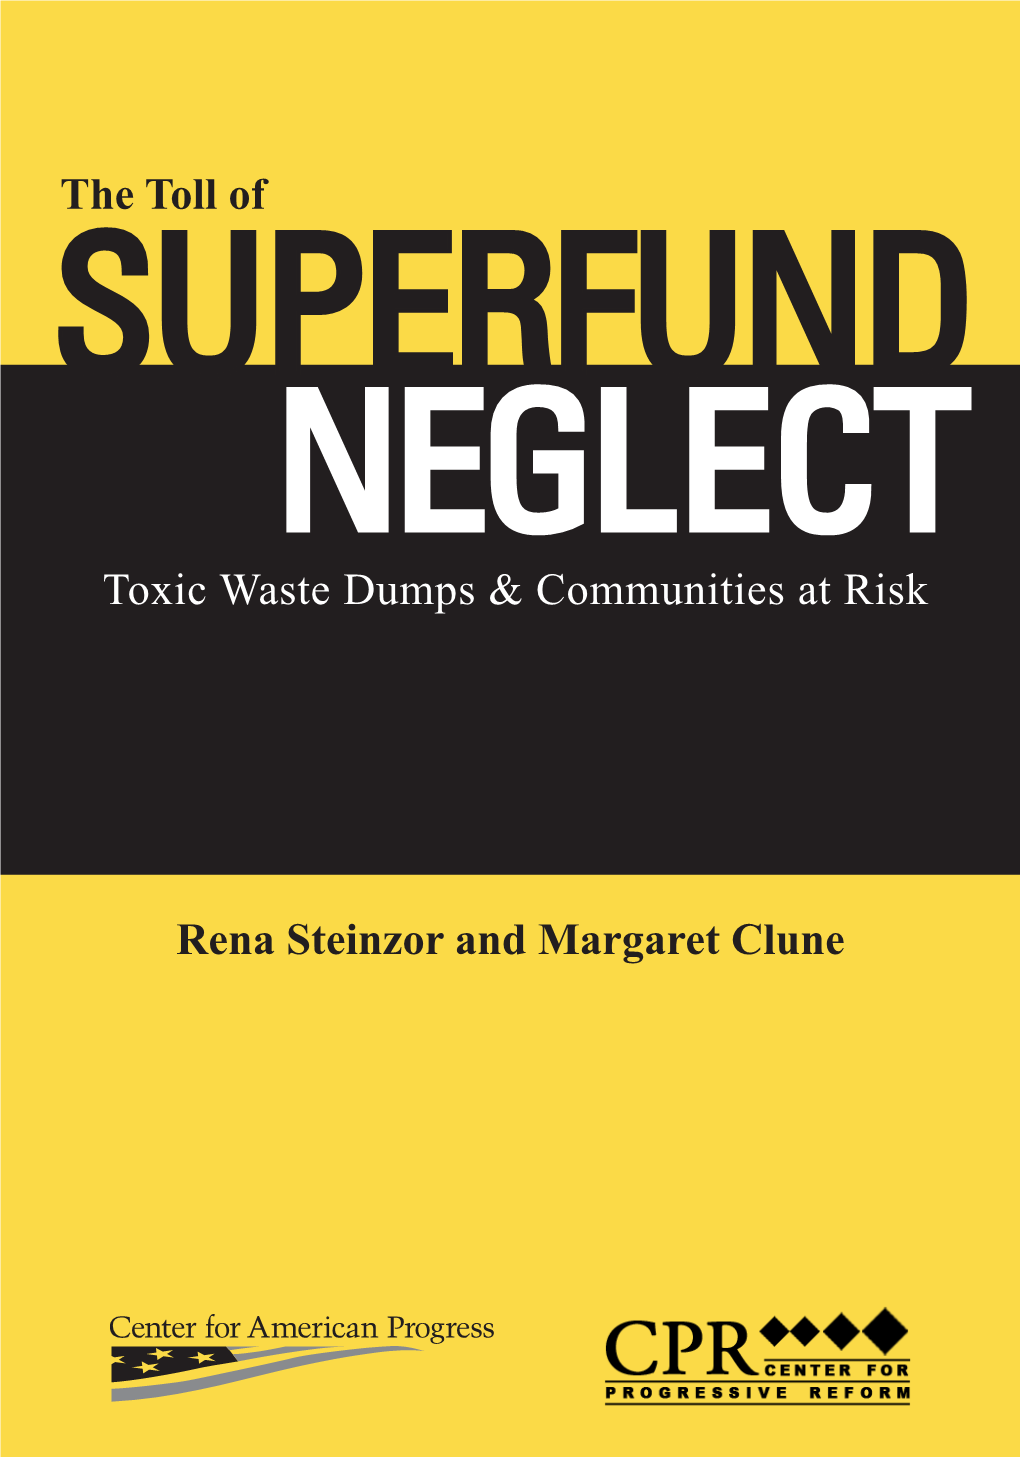 The Toll of SUPERFUND NEGLECT Toxic Waste Dumps & Communities at Risk